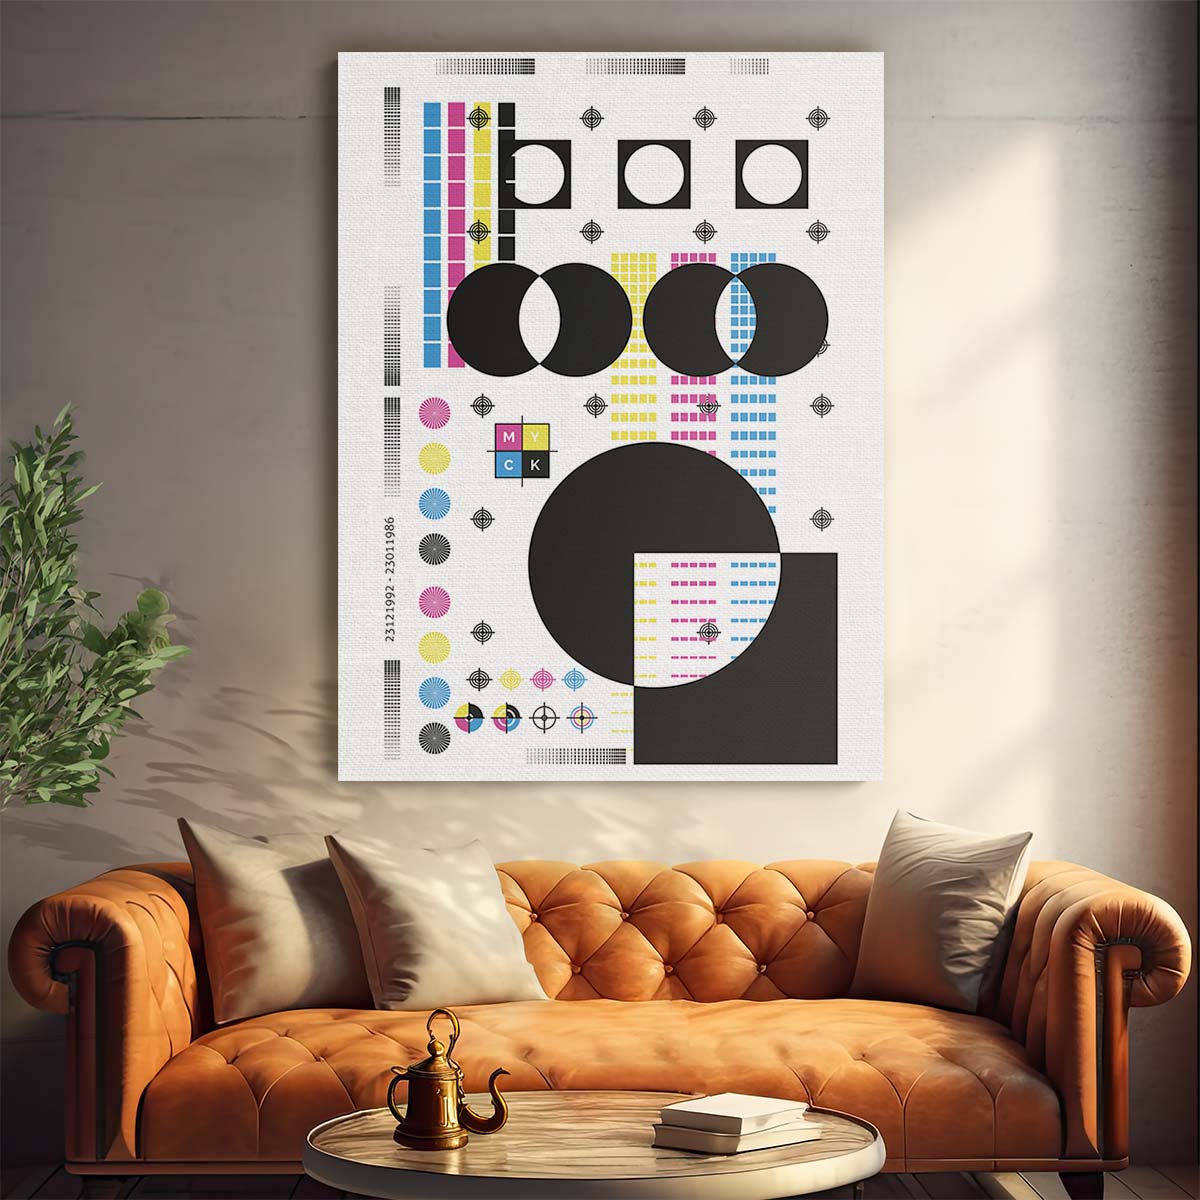 Sergio Ortiz's Abstract Geometric CMYK Illustration Art for Home by Luxuriance Designs, made in USA